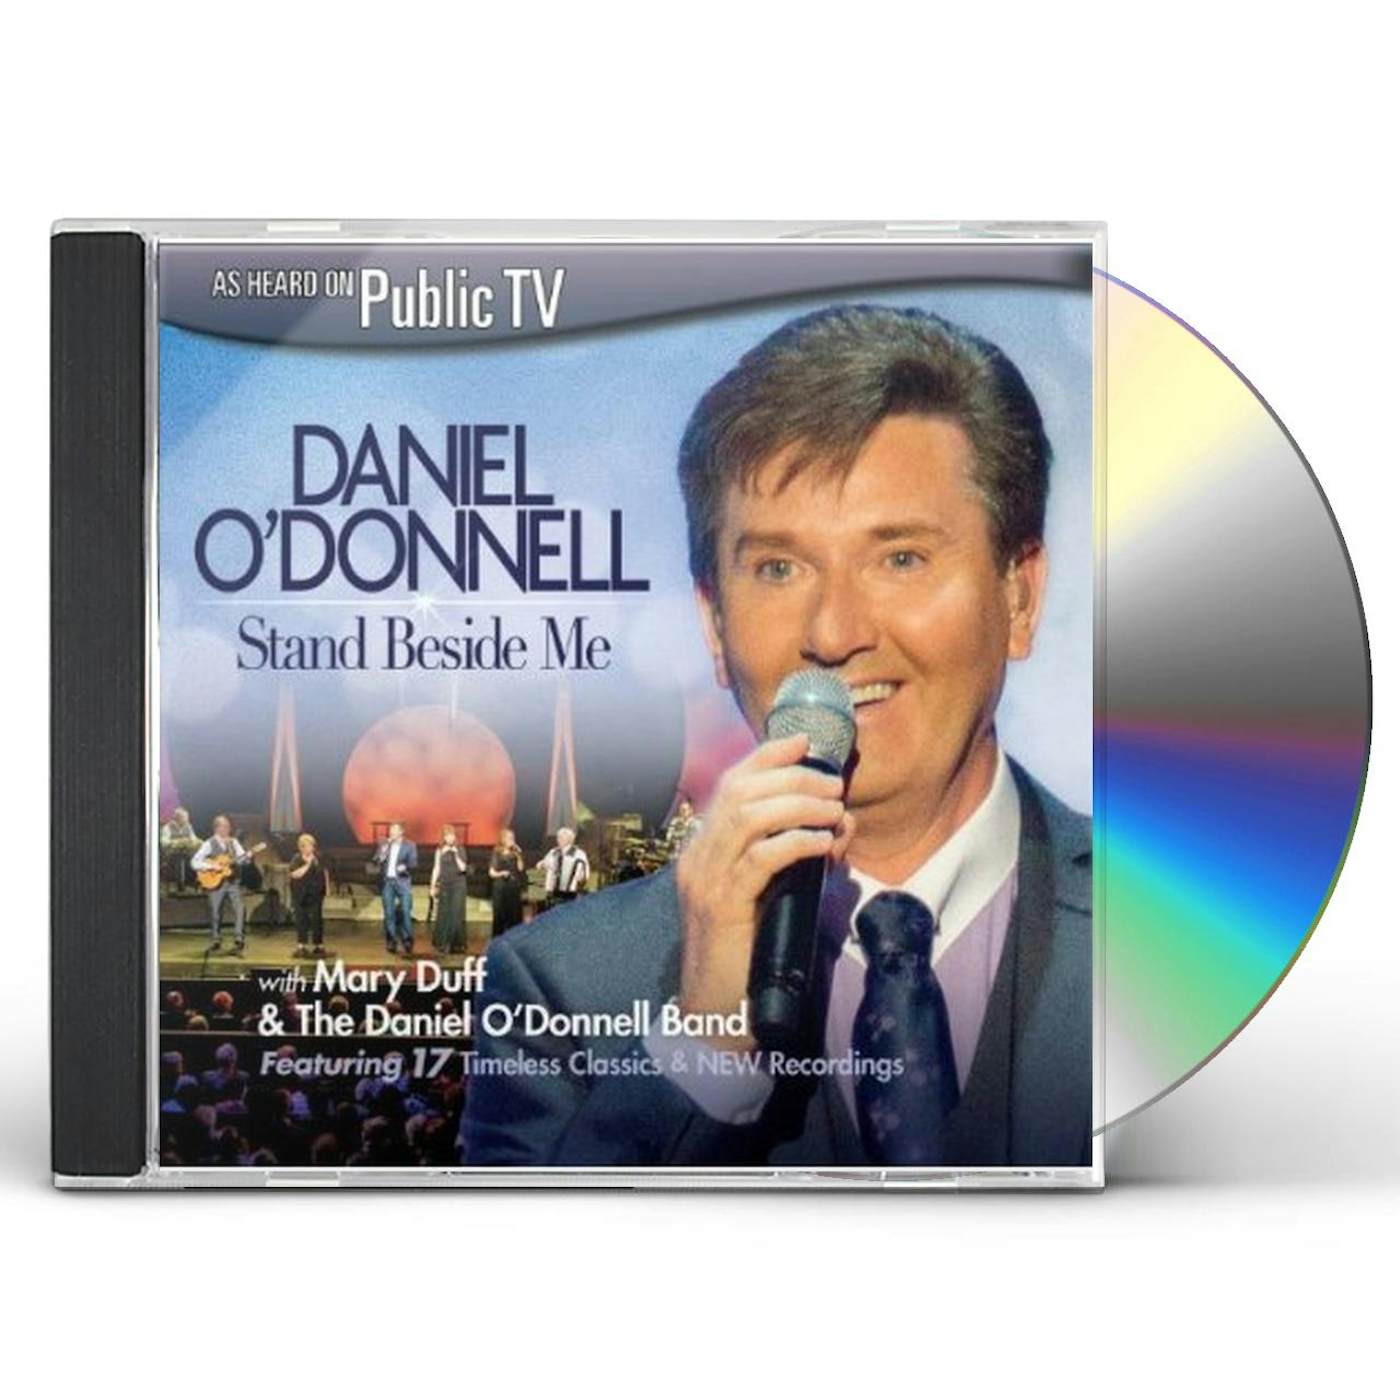 Daniel O'Donnell EXCL STAND BESIDE ME CD